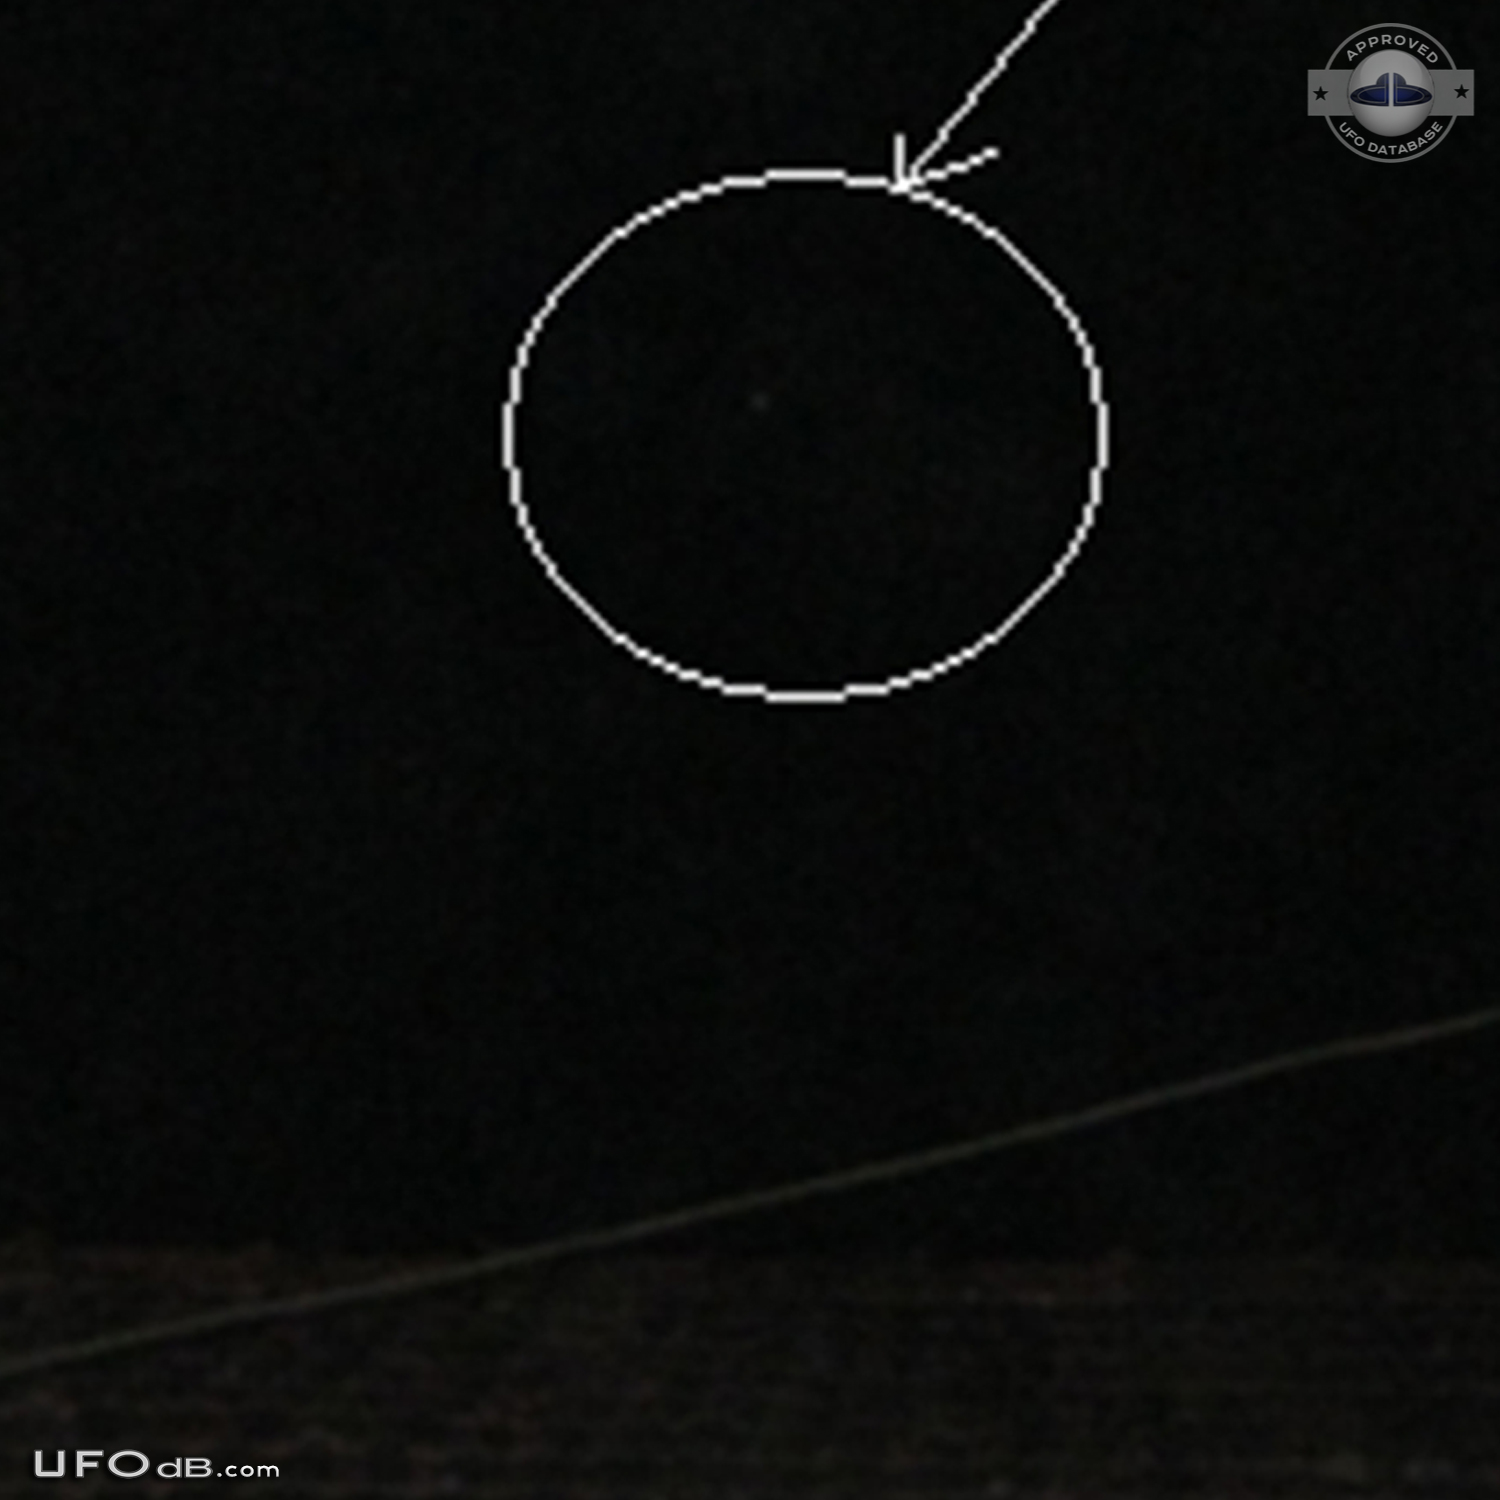 UFO over South sky in Gampaha Sri Lanka Changing Red,Blue,White lights UFO Picture #606-3